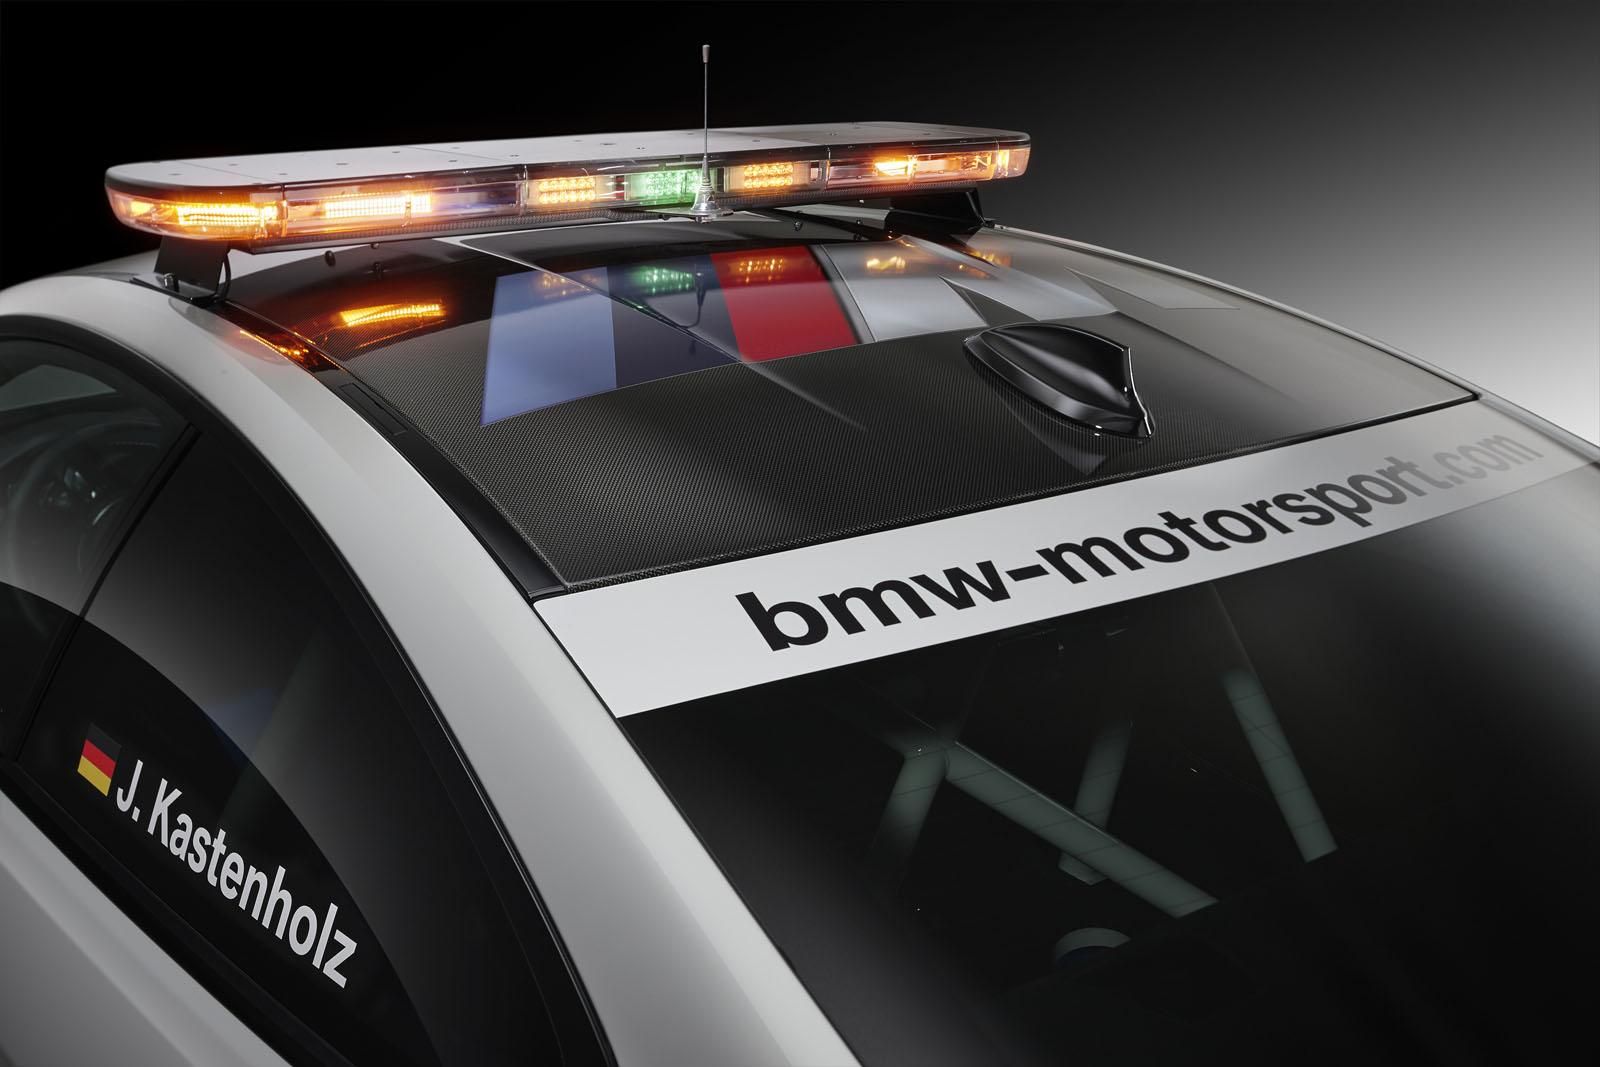 2014 BMW M4 Coupe DTM Safety Car